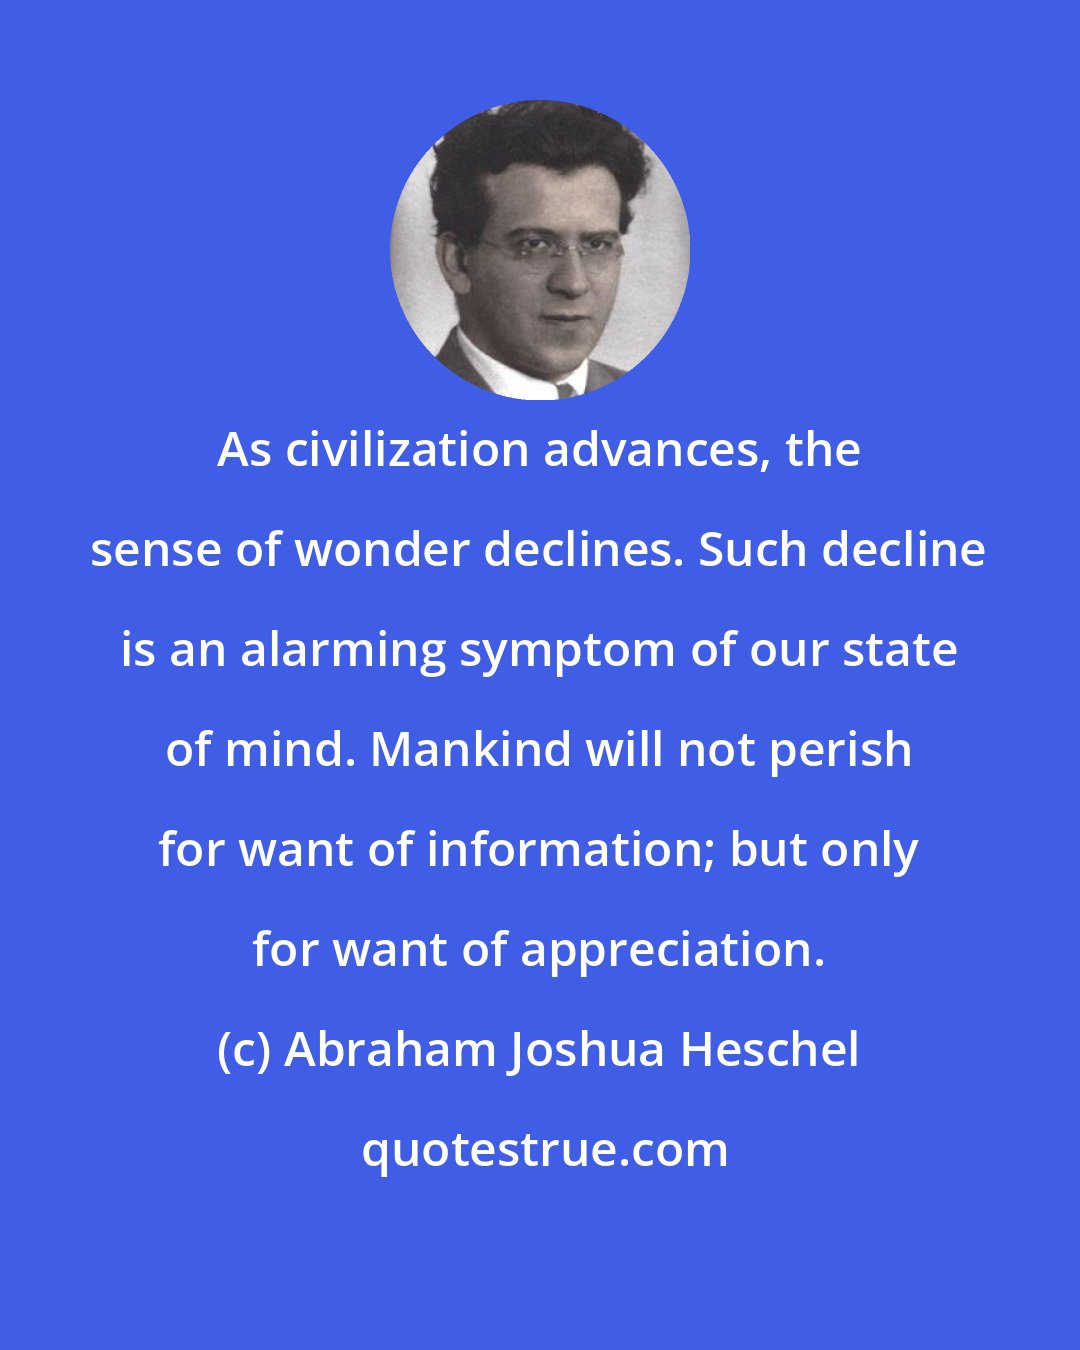 Abraham Joshua Heschel: As civilization advances, the sense of wonder declines. Such decline is an alarming symptom of our state of mind. Mankind will not perish for want of information; but only for want of appreciation.